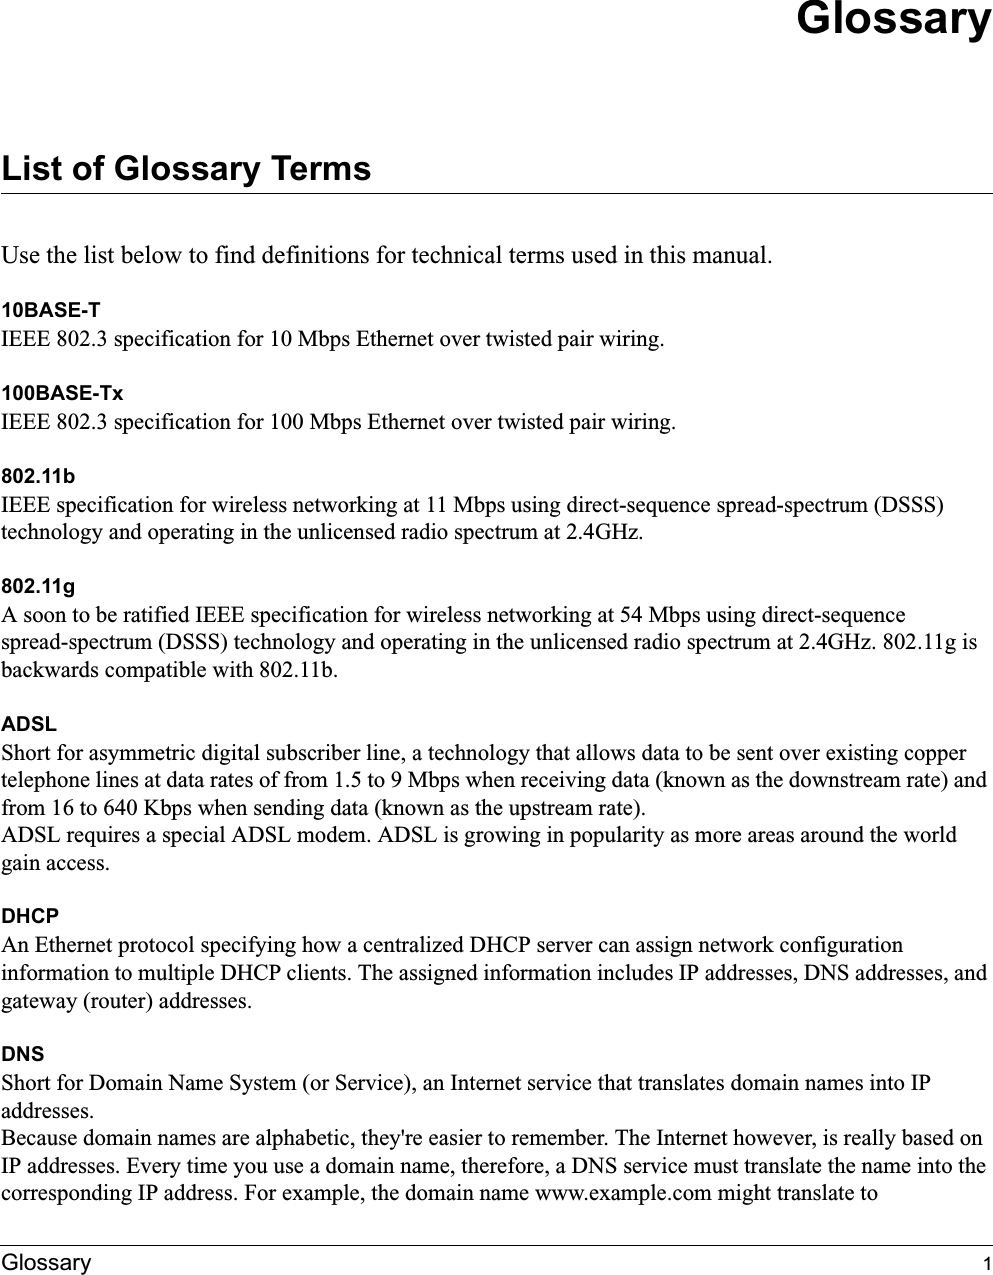 Glossary 1GlossaryList of Glossary TermsUse the list below to find definitions for technical terms used in this manual.10BASE-T IEEE 802.3 specification for 10 Mbps Ethernet over twisted pair wiring.100BASE-Tx IEEE 802.3 specification for 100 Mbps Ethernet over twisted pair wiring.802.11bIEEE specification for wireless networking at 11 Mbps using direct-sequence spread-spectrum (DSSS) technology and operating in the unlicensed radio spectrum at 2.4GHz.802.11gA soon to be ratified IEEE specification for wireless networking at 54 Mbps using direct-sequence spread-spectrum (DSSS) technology and operating in the unlicensed radio spectrum at 2.4GHz. 802.11g is backwards compatible with 802.11b.ADSLShort for asymmetric digital subscriber line, a technology that allows data to be sent over existing copper telephone lines at data rates of from 1.5 to 9 Mbps when receiving data (known as the downstream rate) and from 16 to 640 Kbps when sending data (known as the upstream rate). ADSL requires a special ADSL modem. ADSL is growing in popularity as more areas around the world gain access. DHCPAn Ethernet protocol specifying how a centralized DHCP server can assign network configuration information to multiple DHCP clients. The assigned information includes IP addresses, DNS addresses, and gateway (router) addresses.DNSShort for Domain Name System (or Service), an Internet service that translates domain names into IP addresses.Because domain names are alphabetic, they&apos;re easier to remember. The Internet however, is really based on IP addresses. Every time you use a domain name, therefore, a DNS service must translate the name into the corresponding IP address. For example, the domain name www.example.com might translate to 